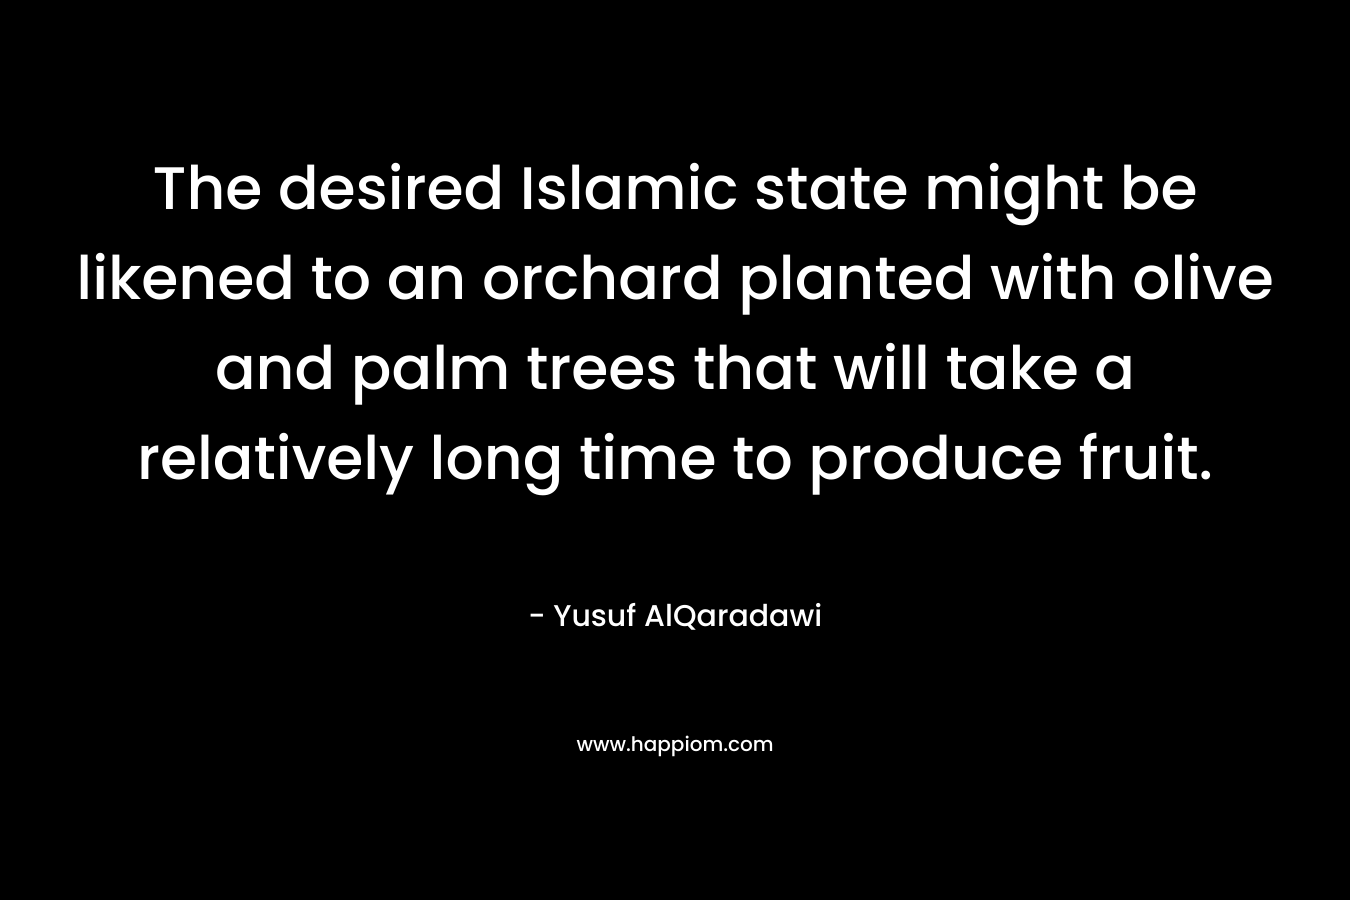 The desired Islamic state might be likened to an orchard planted with olive and palm trees that will take a relatively long time to produce fruit.